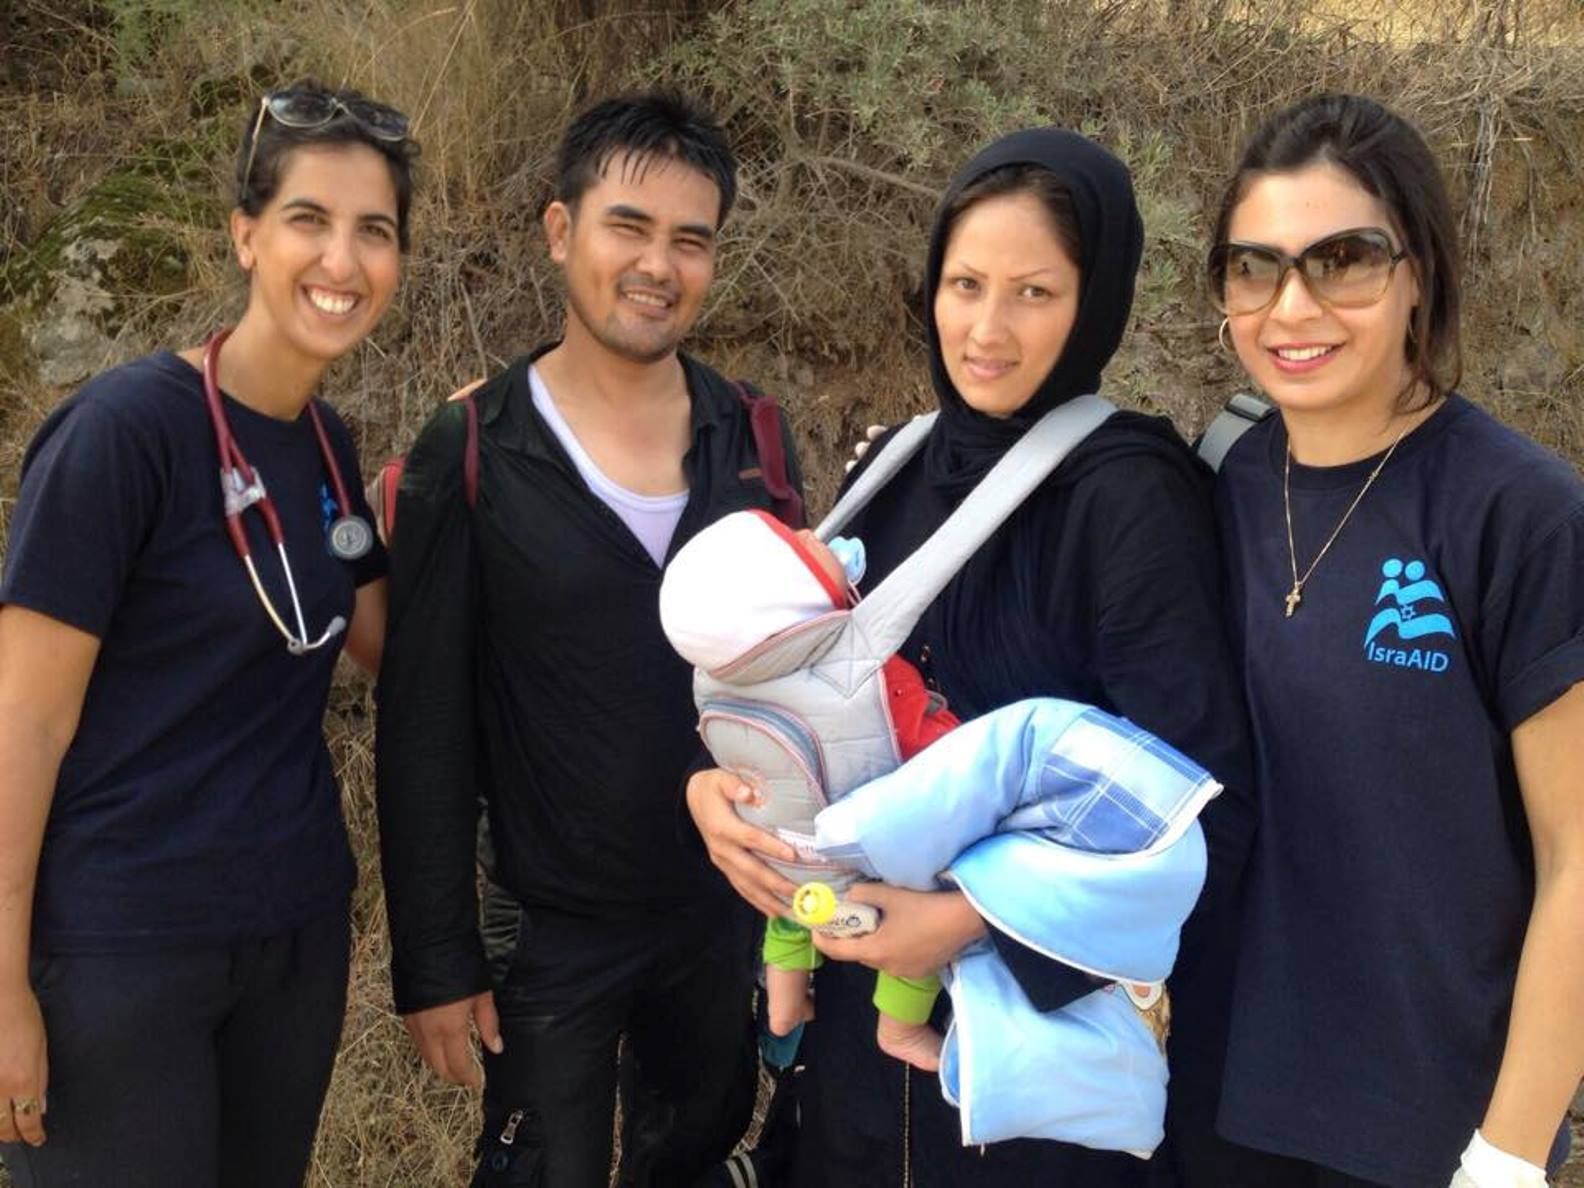 Jewish Israeli and Arab Israeli IsraAID volunteers flank a refugee couple to whom they gave a baby carrier. Photo via Facebook